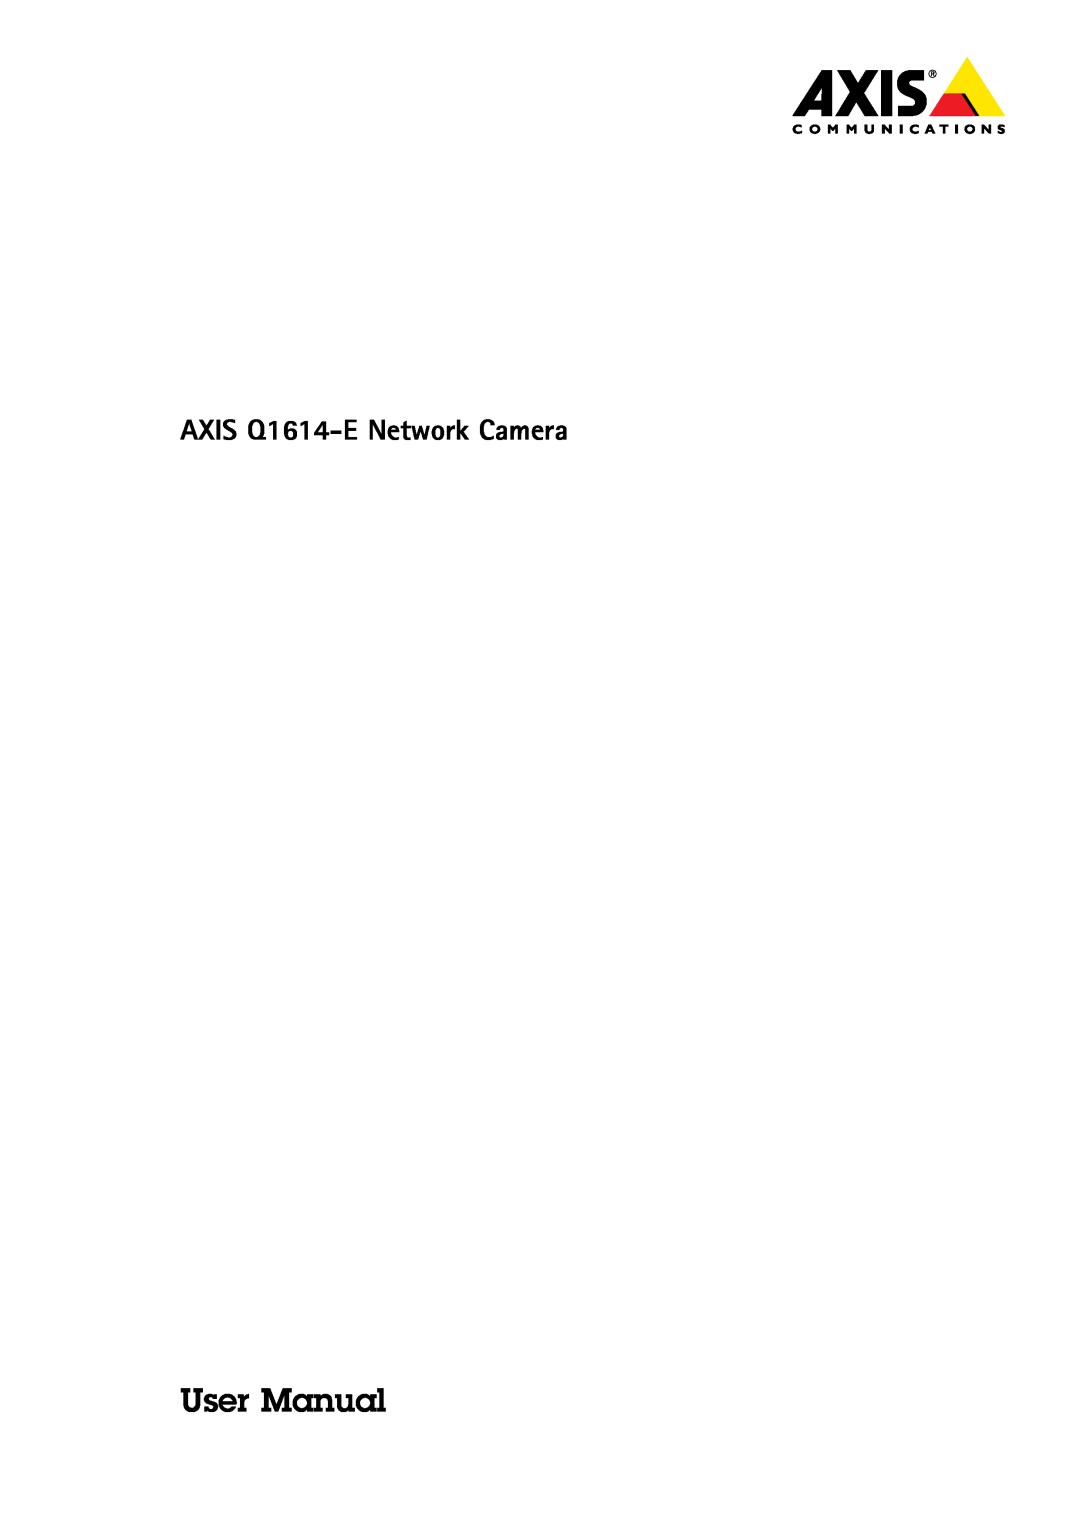 Axis Communications user manual User Manual, AXIS Q1614-E Network Camera 